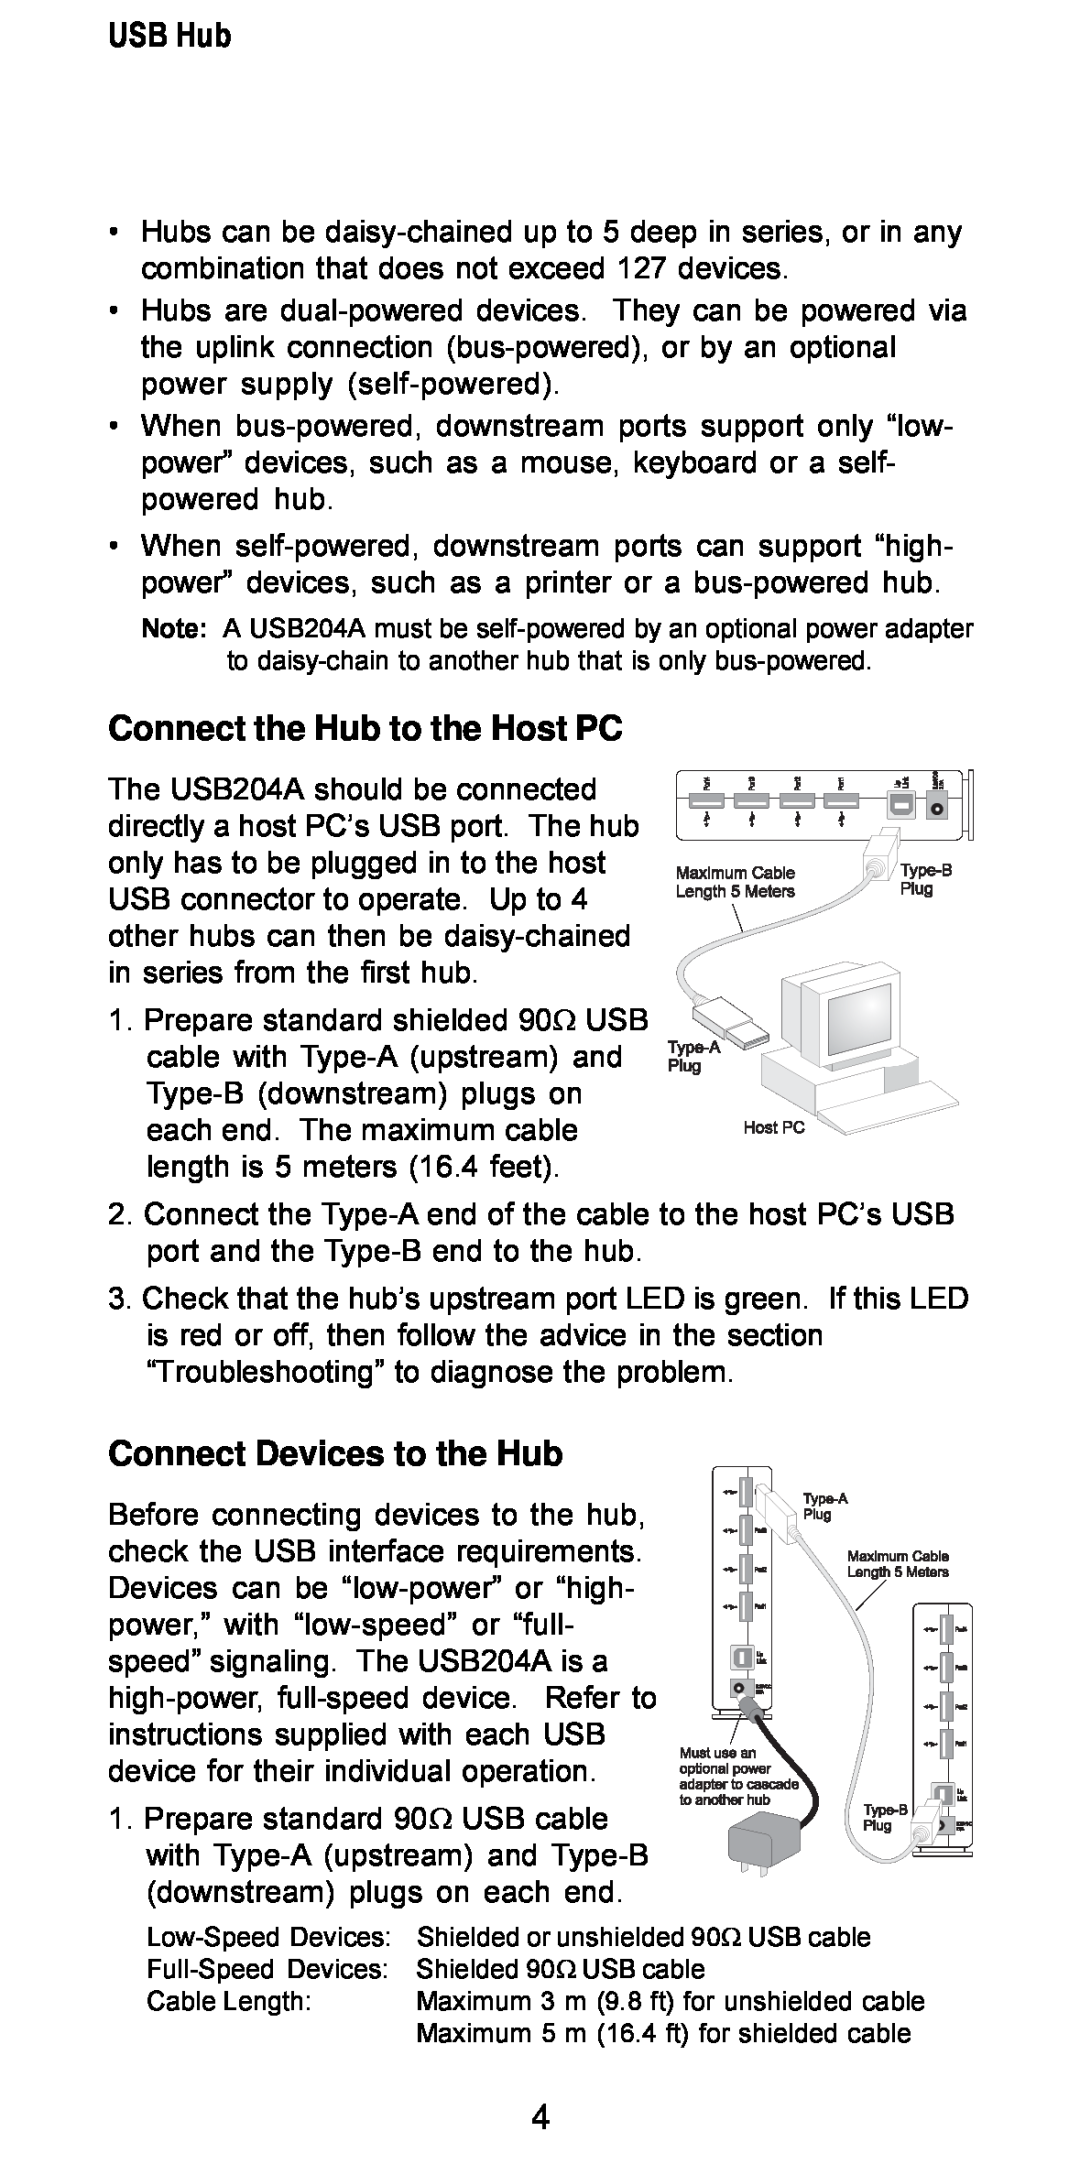 Accton Technology USB204A manual USB Hub, Connect the Hub to the Host PC, Connect Devices to the Hub, Low-Speed Devices 